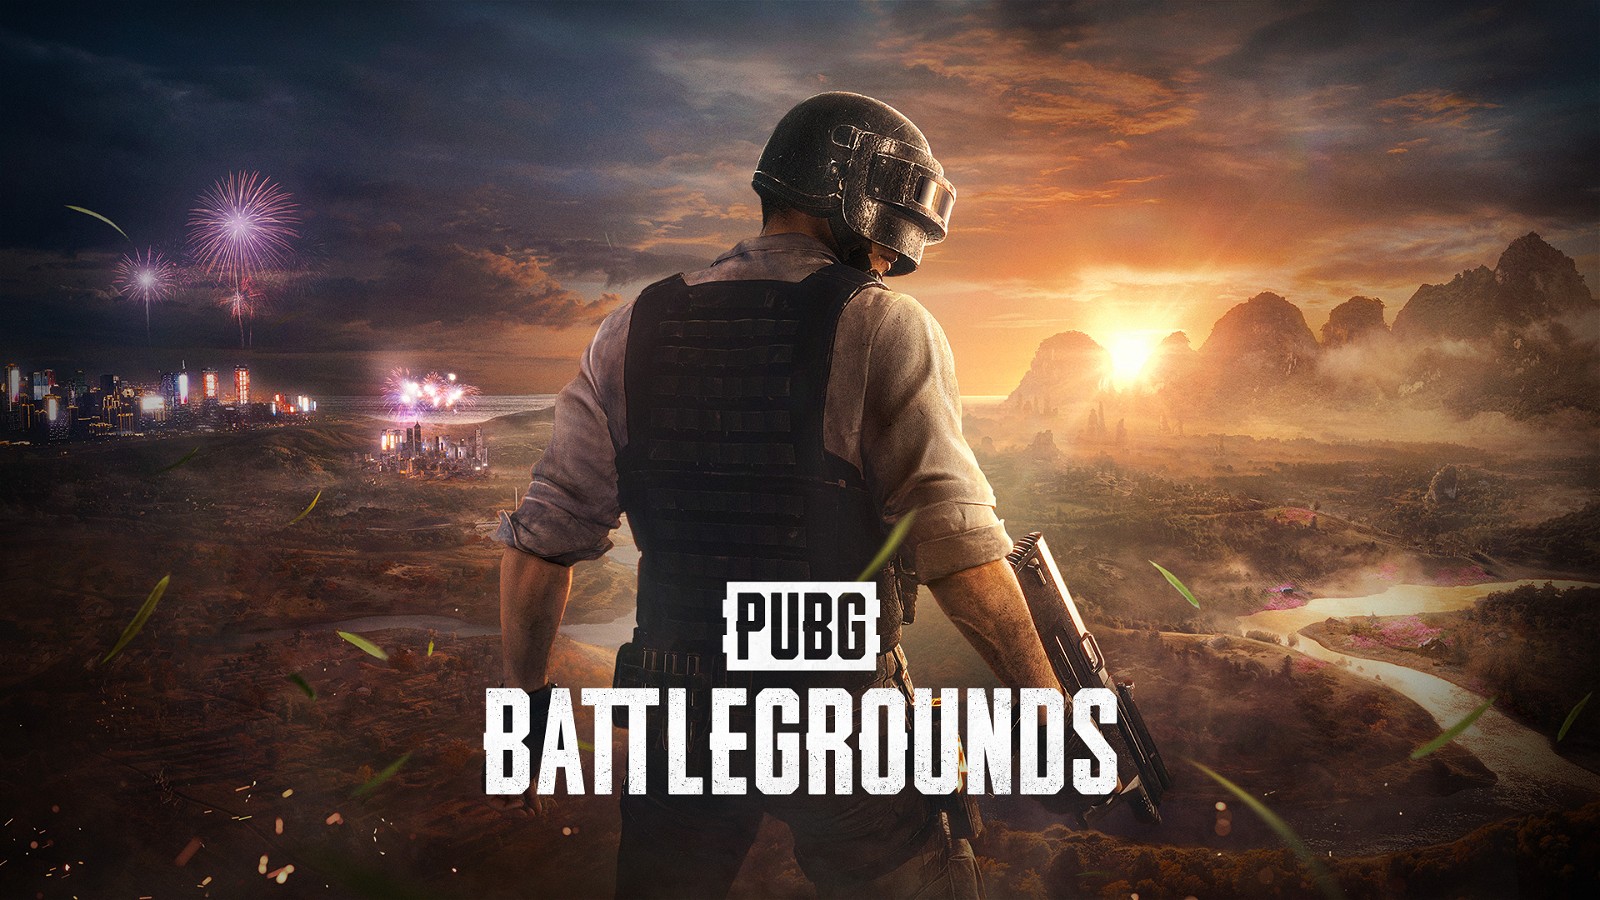 PUBG: Battlegrounds unsurprisingly makes it to the top of the most played Steam game list